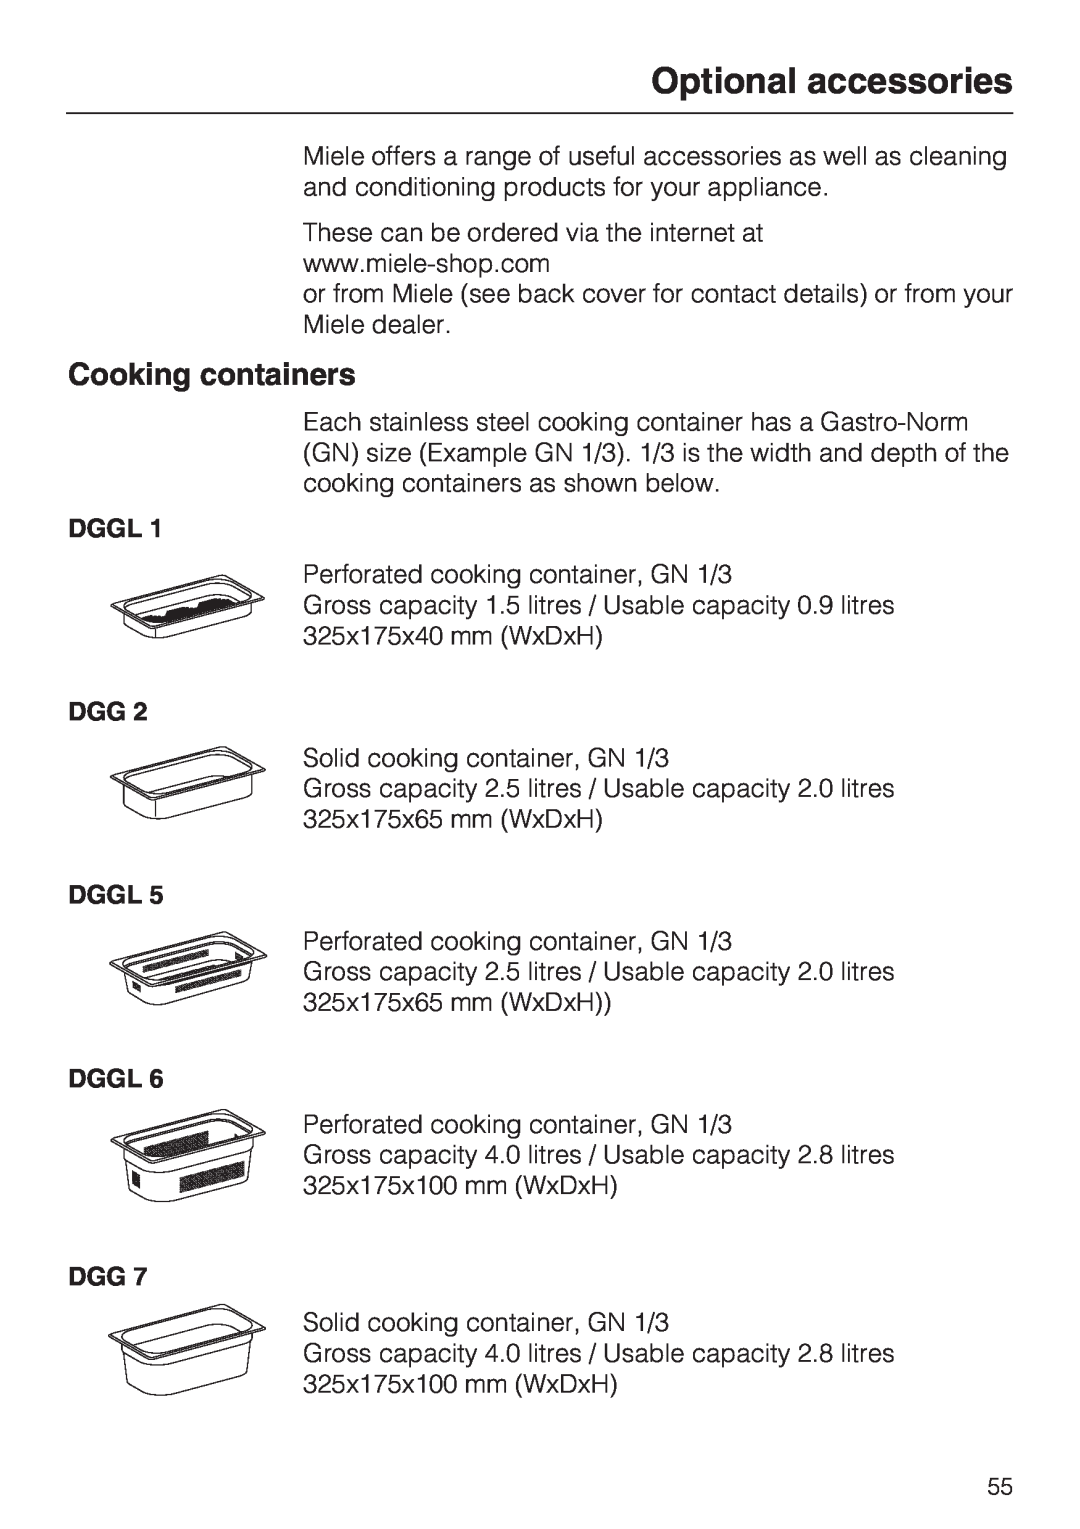 Miele DG 4064 L, DG 4164 L operating instructions Optional accessories, Cooking containers, Dggl 